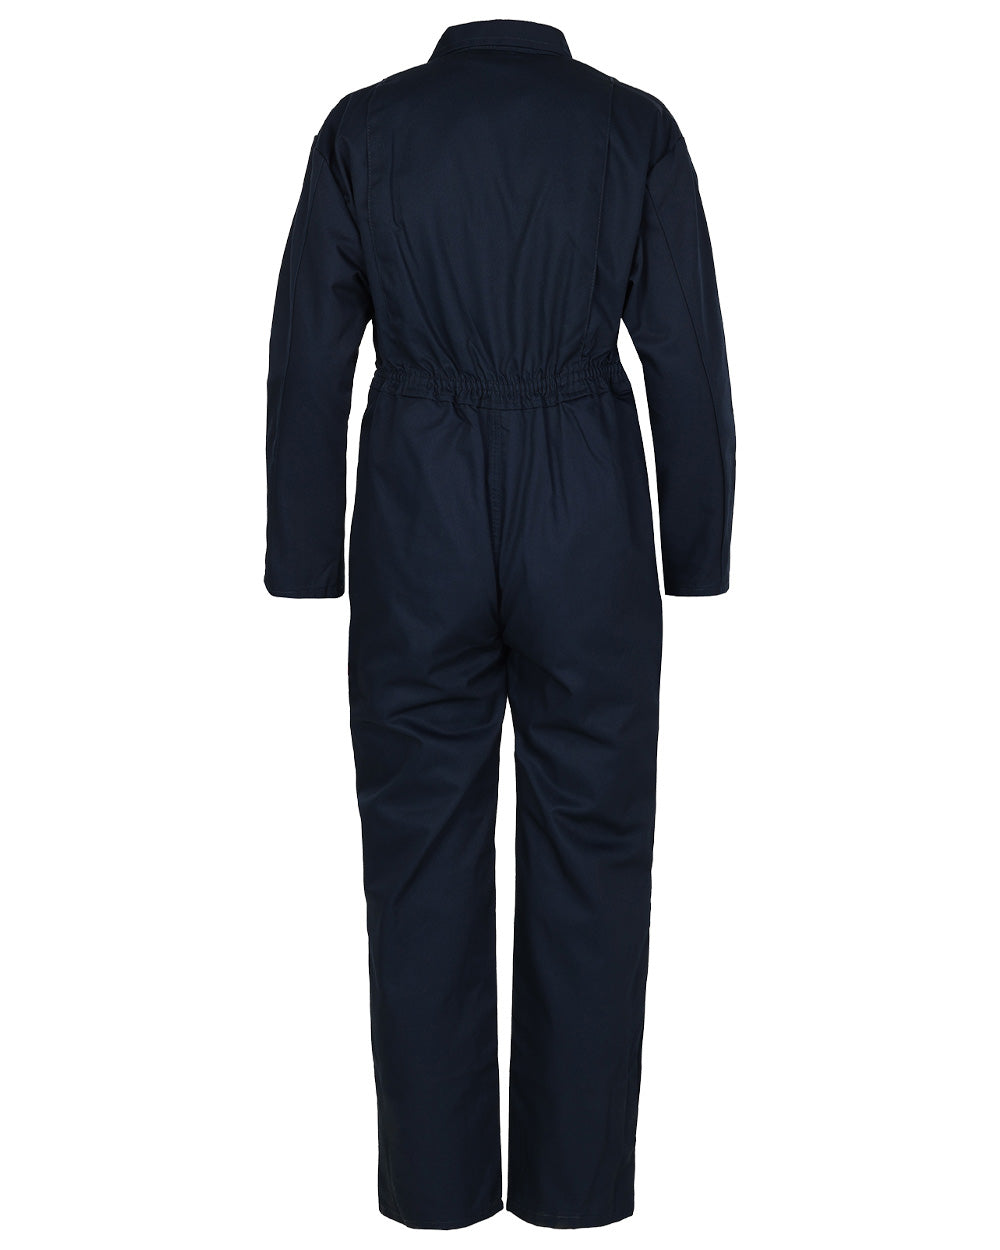 Navy coloured Fort Tearaway Junior Coverall on White background 